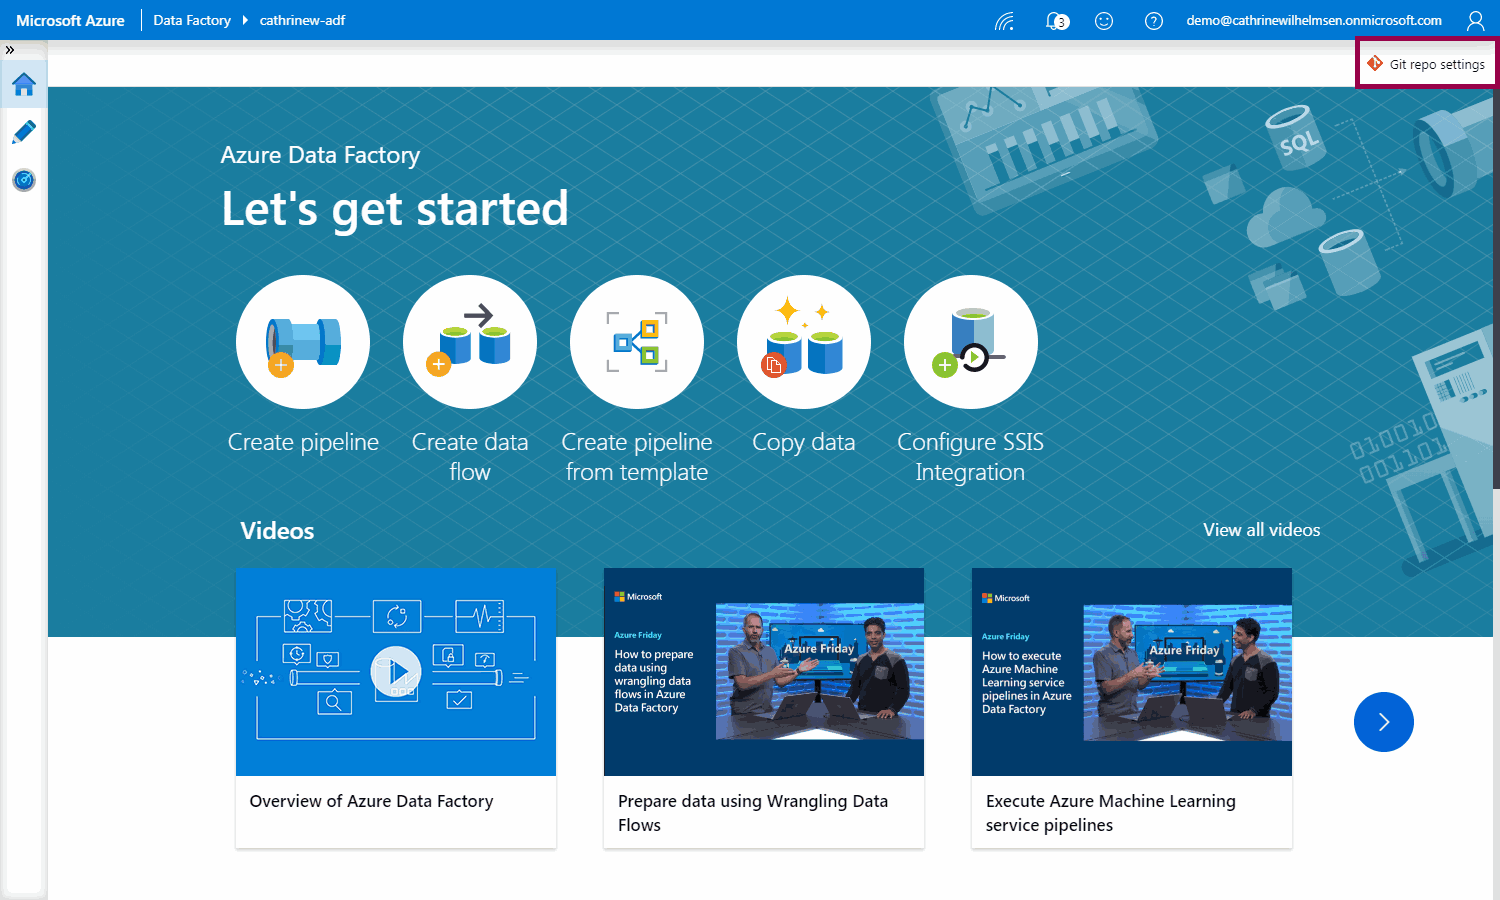 Screenshot of the Azure Data Factory home page, highlighting the Git repo settings button